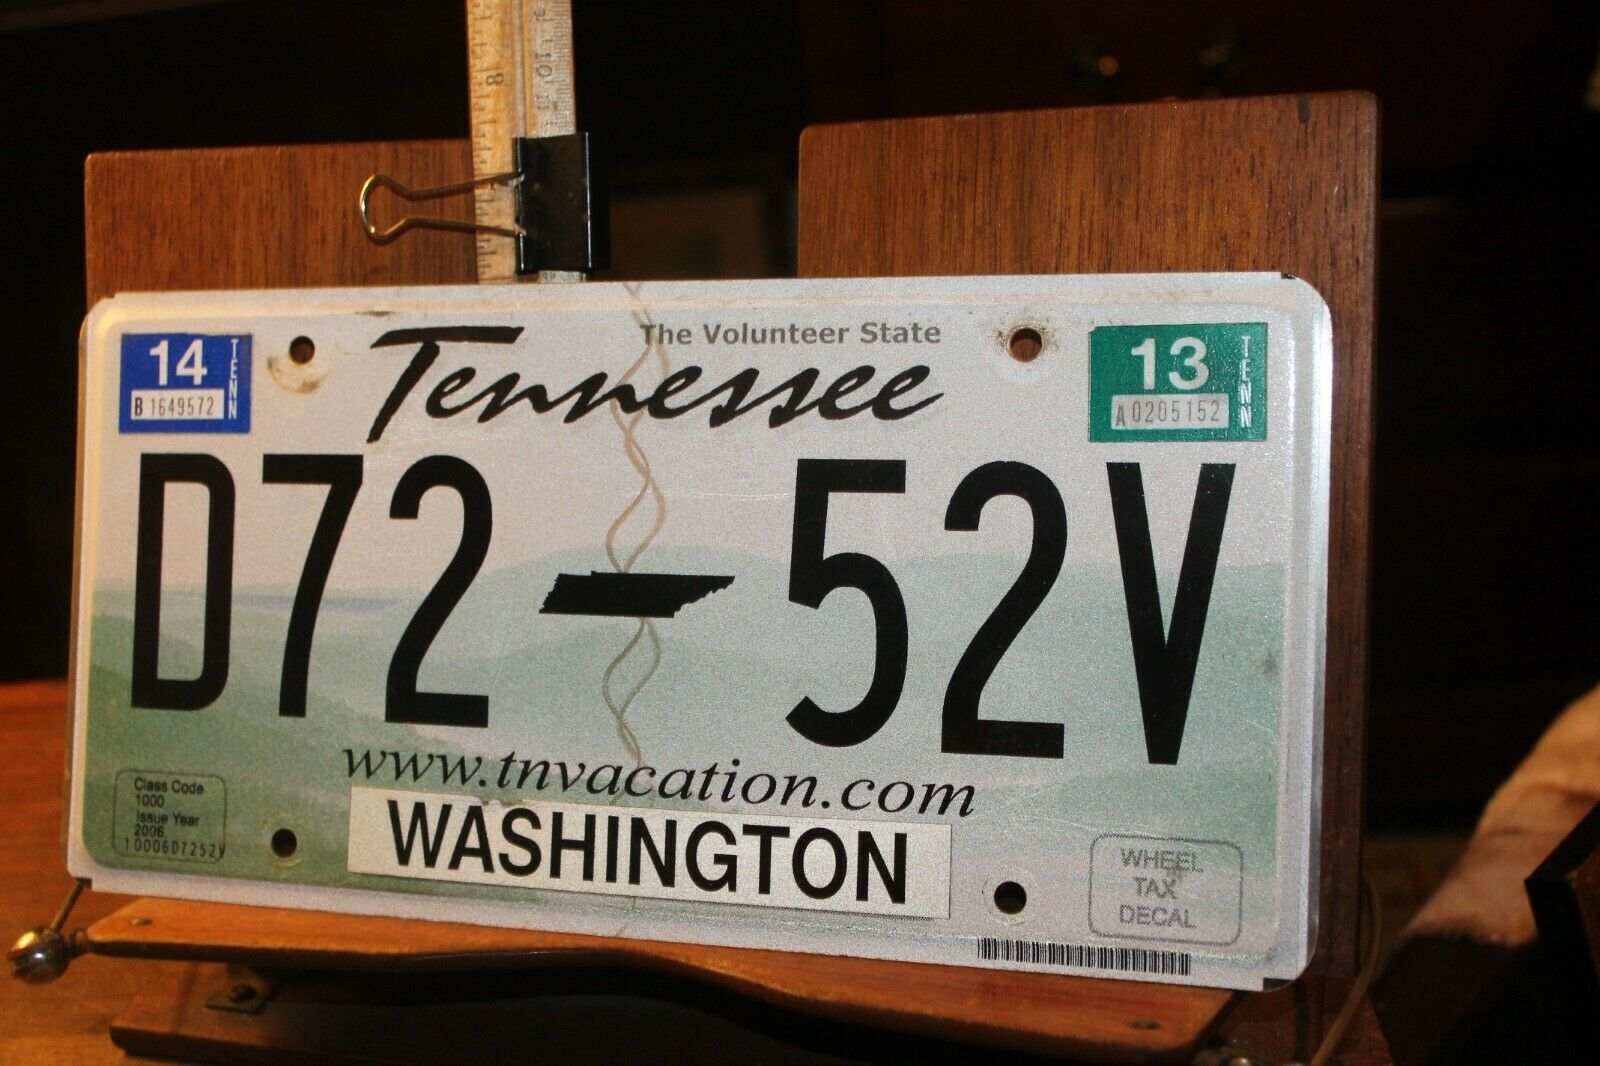 2014 Tennessee License Plate Washington County D72-52v